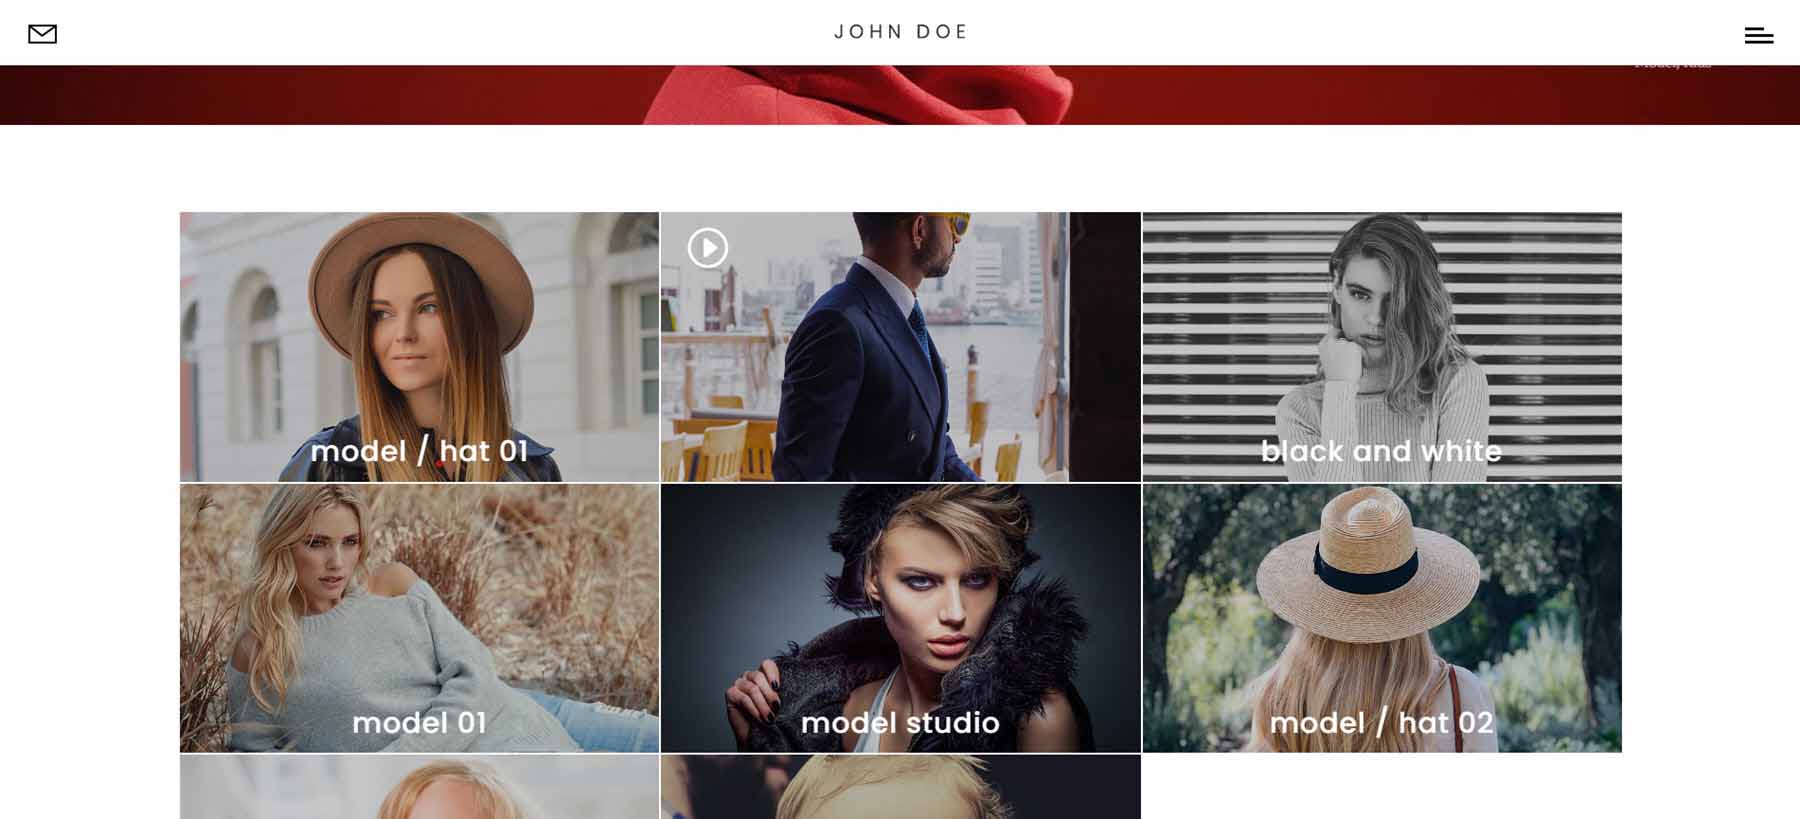 Divi Photography Portfolio Video Gallery Pages